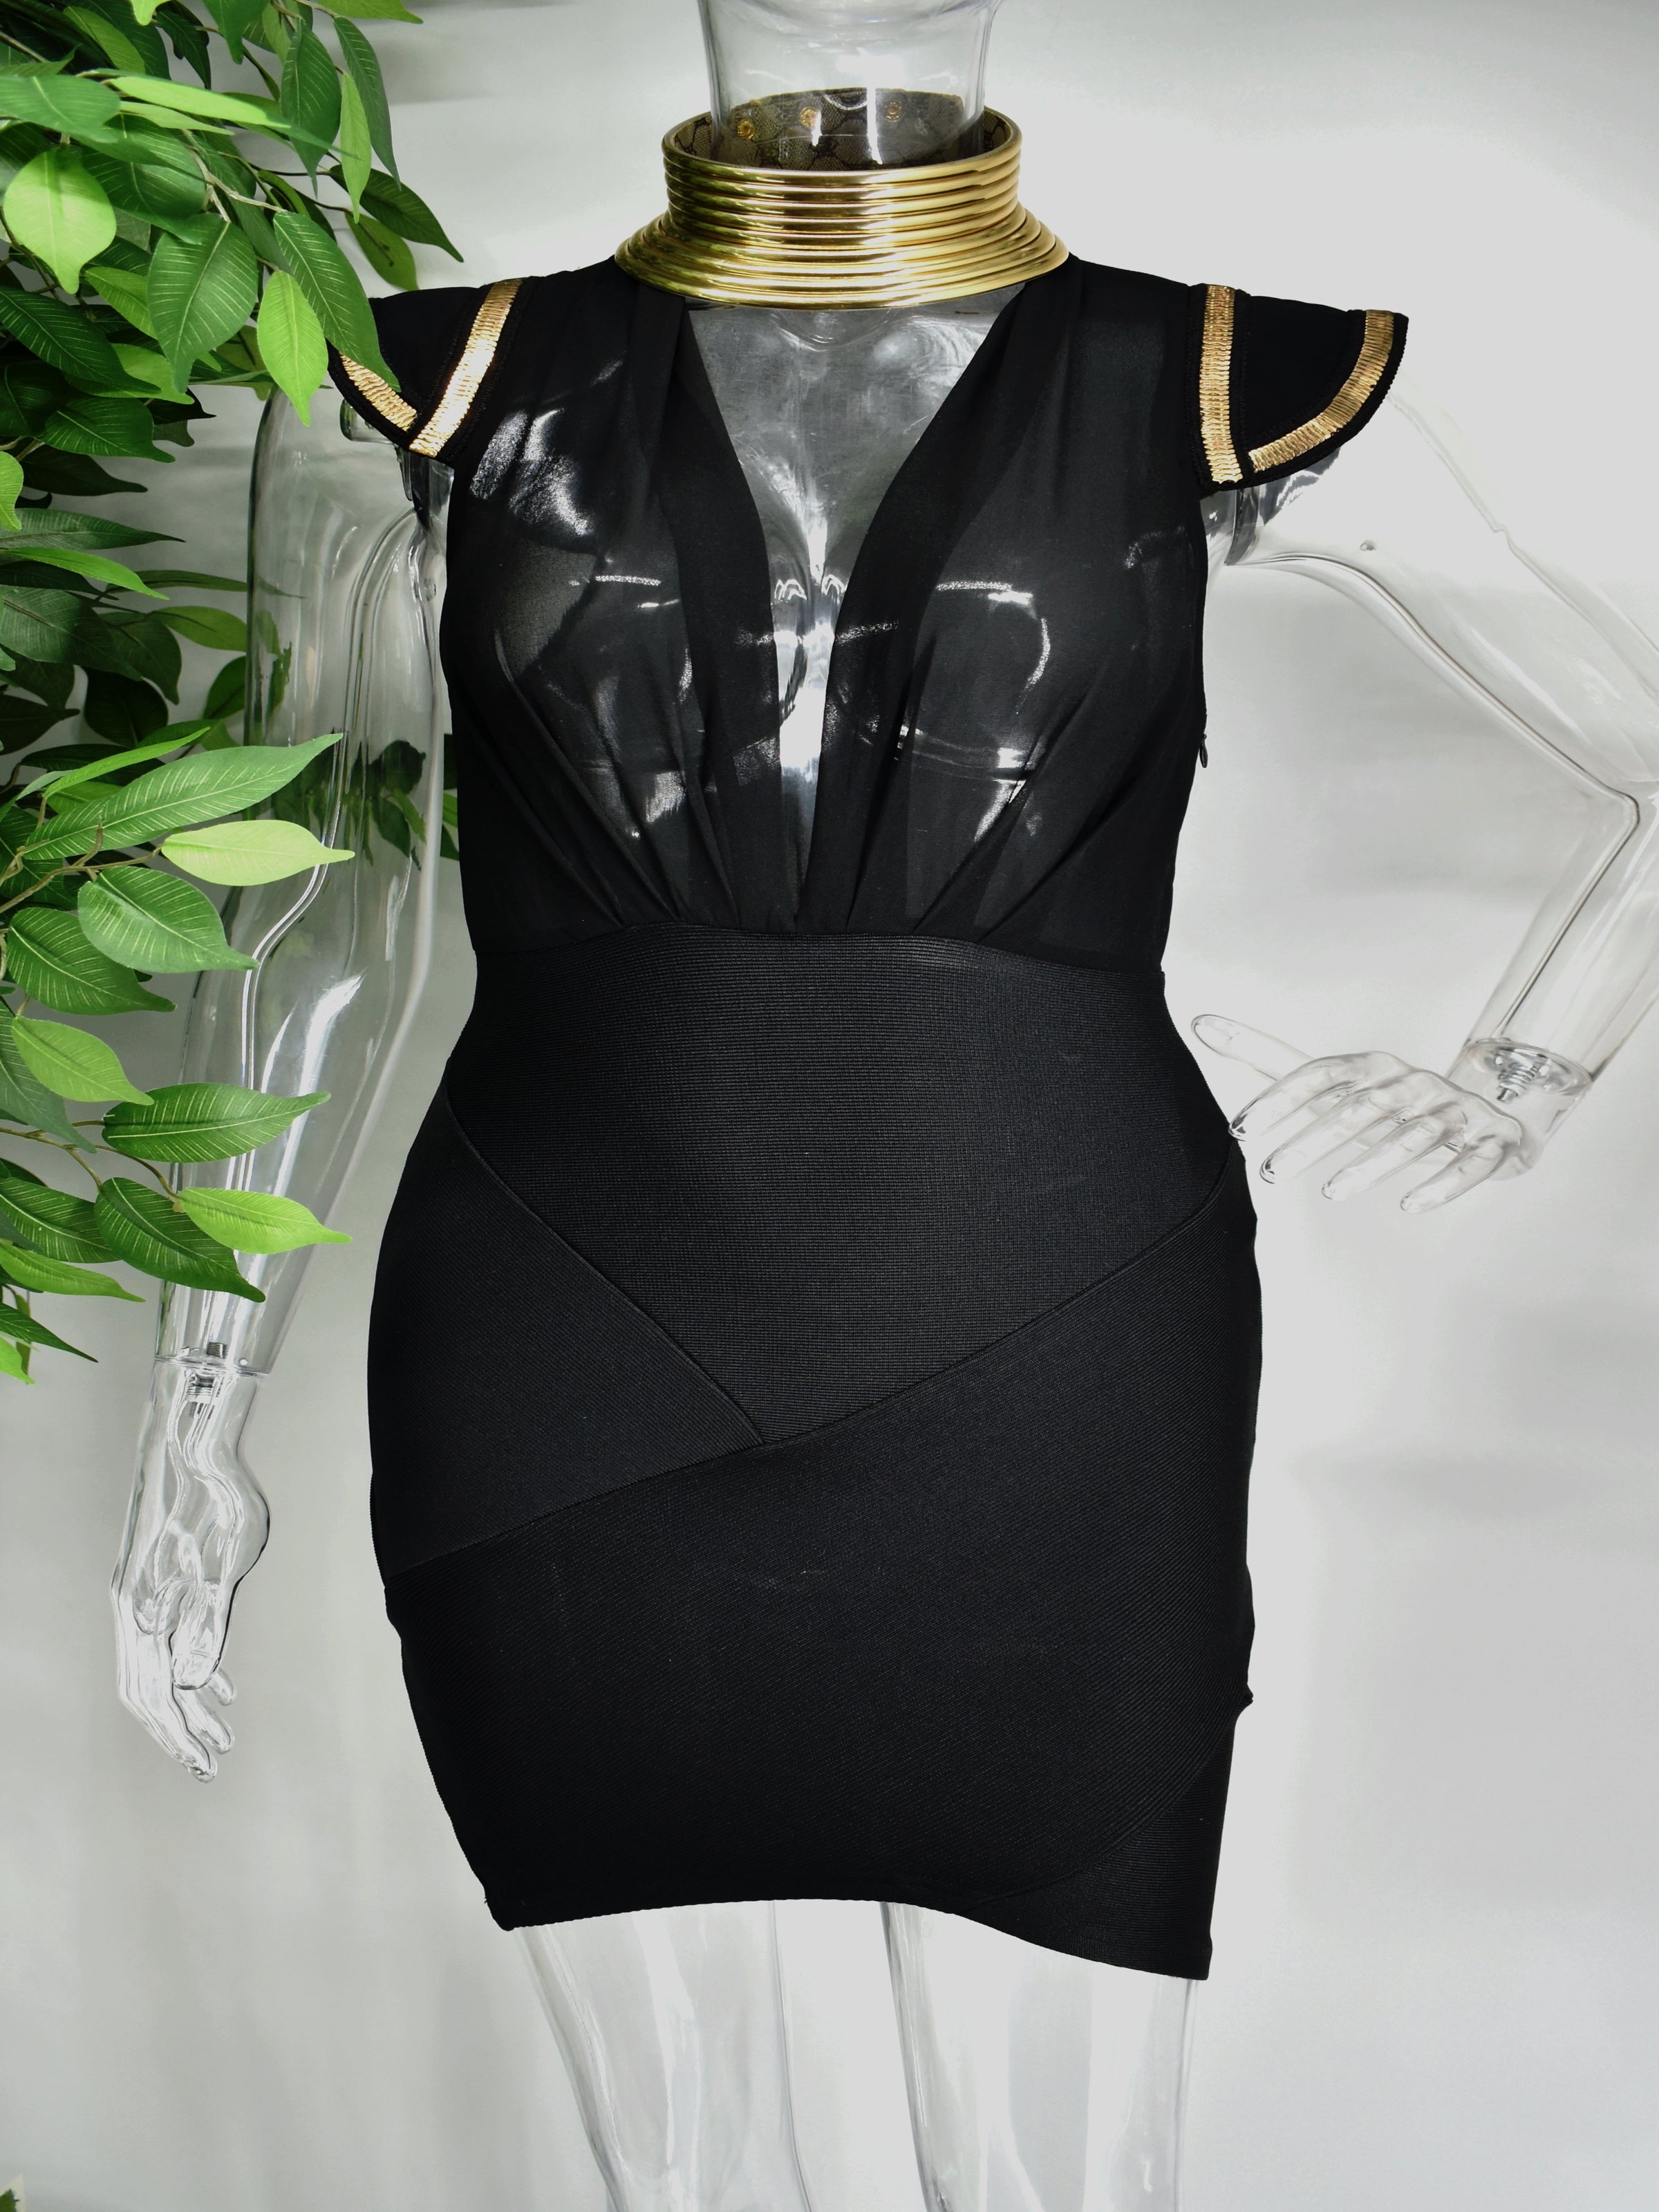 Our Bianca is a black Bandage dress with a sheer bodice and fitted bandage skirt. The capped sleeves are adorned with gold accents to compliment the open v neckline.